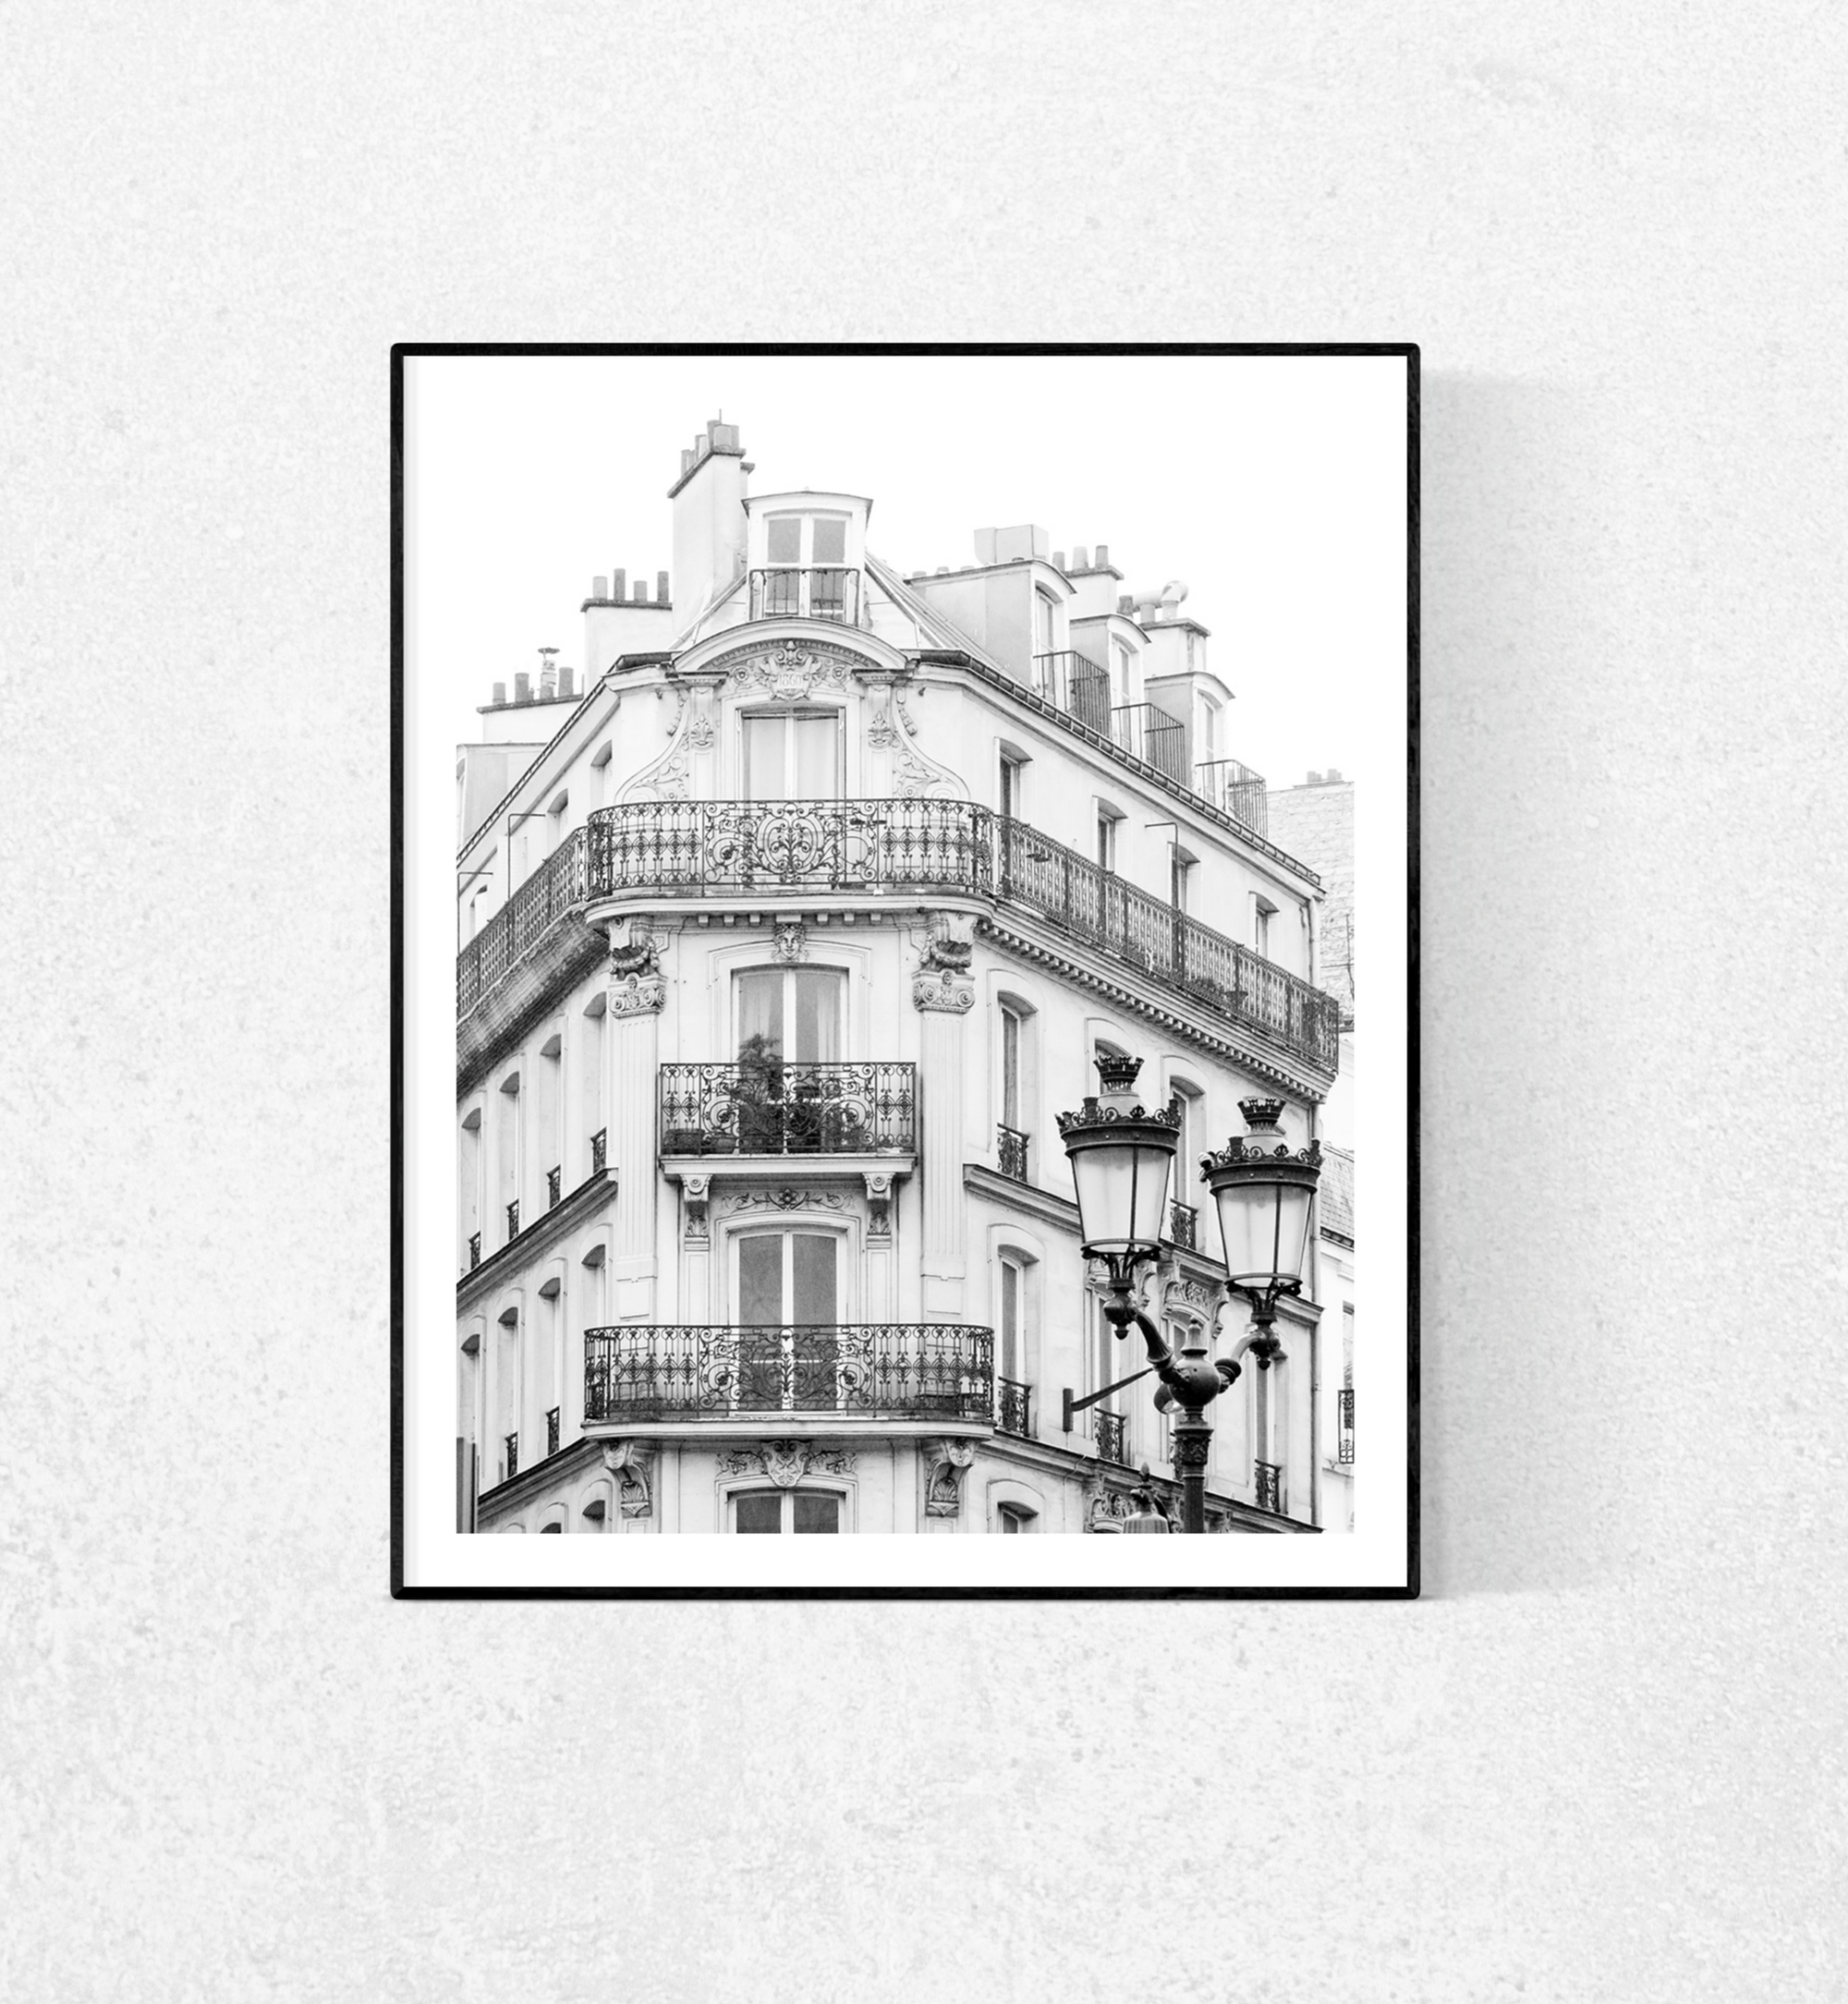 Parisian Apartments in Black and White - Every Day Paris 